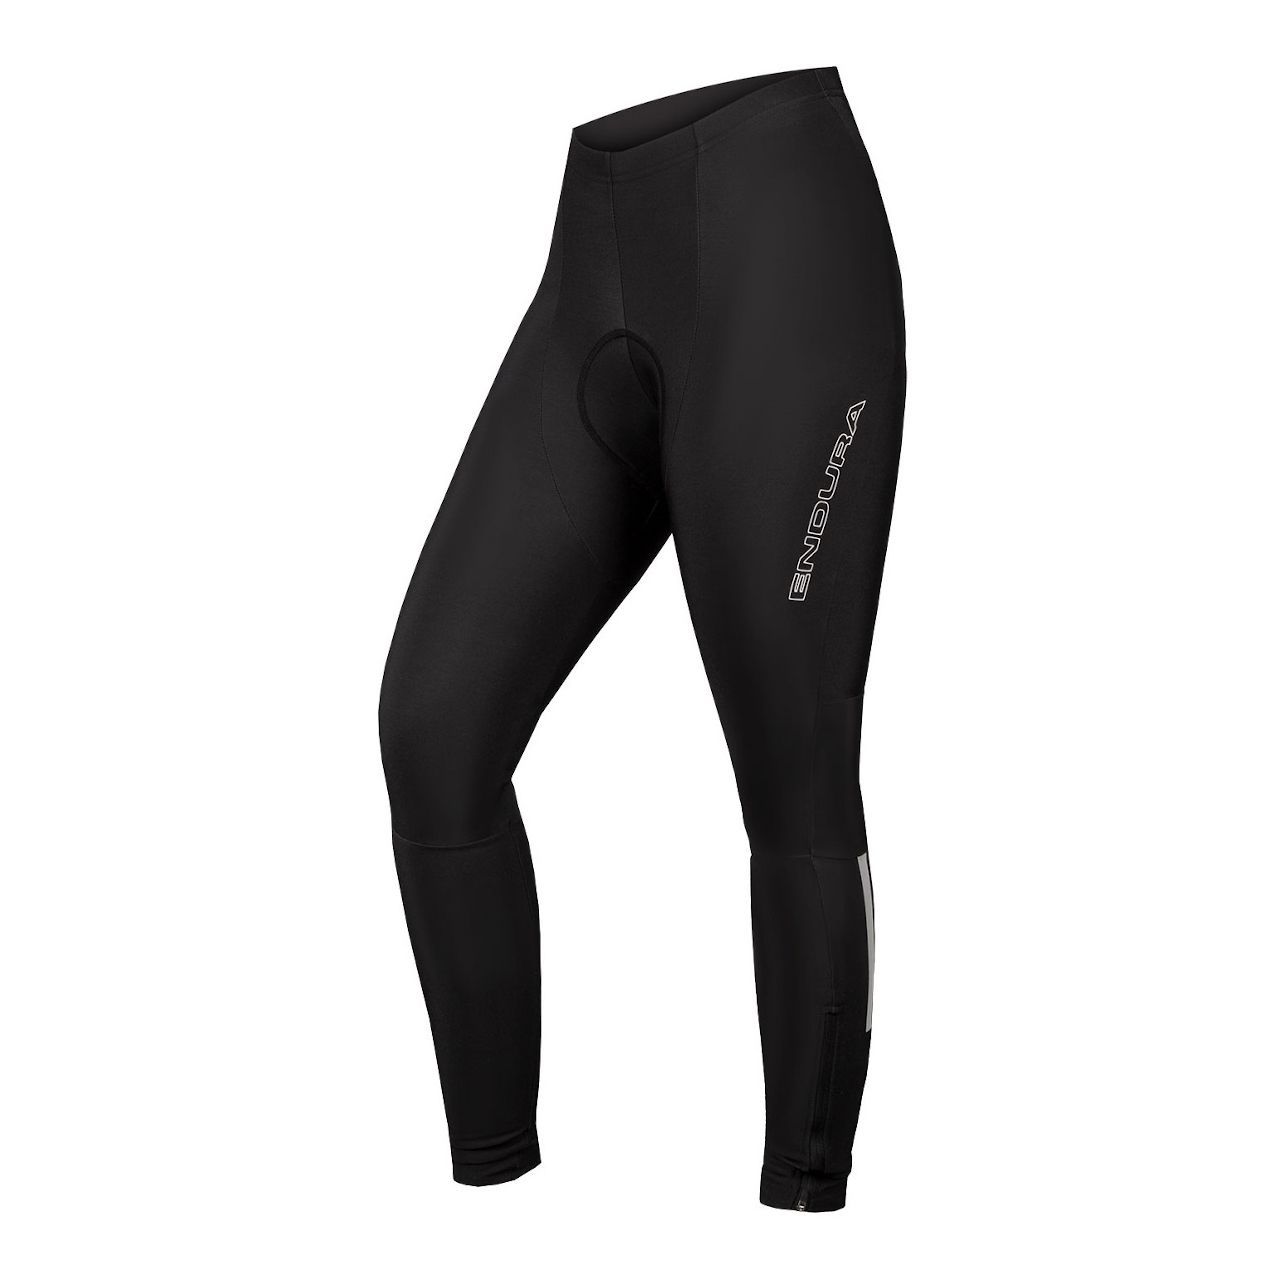 sarcoma rely Voyage 15 Best Cycling Leggings From £18.00